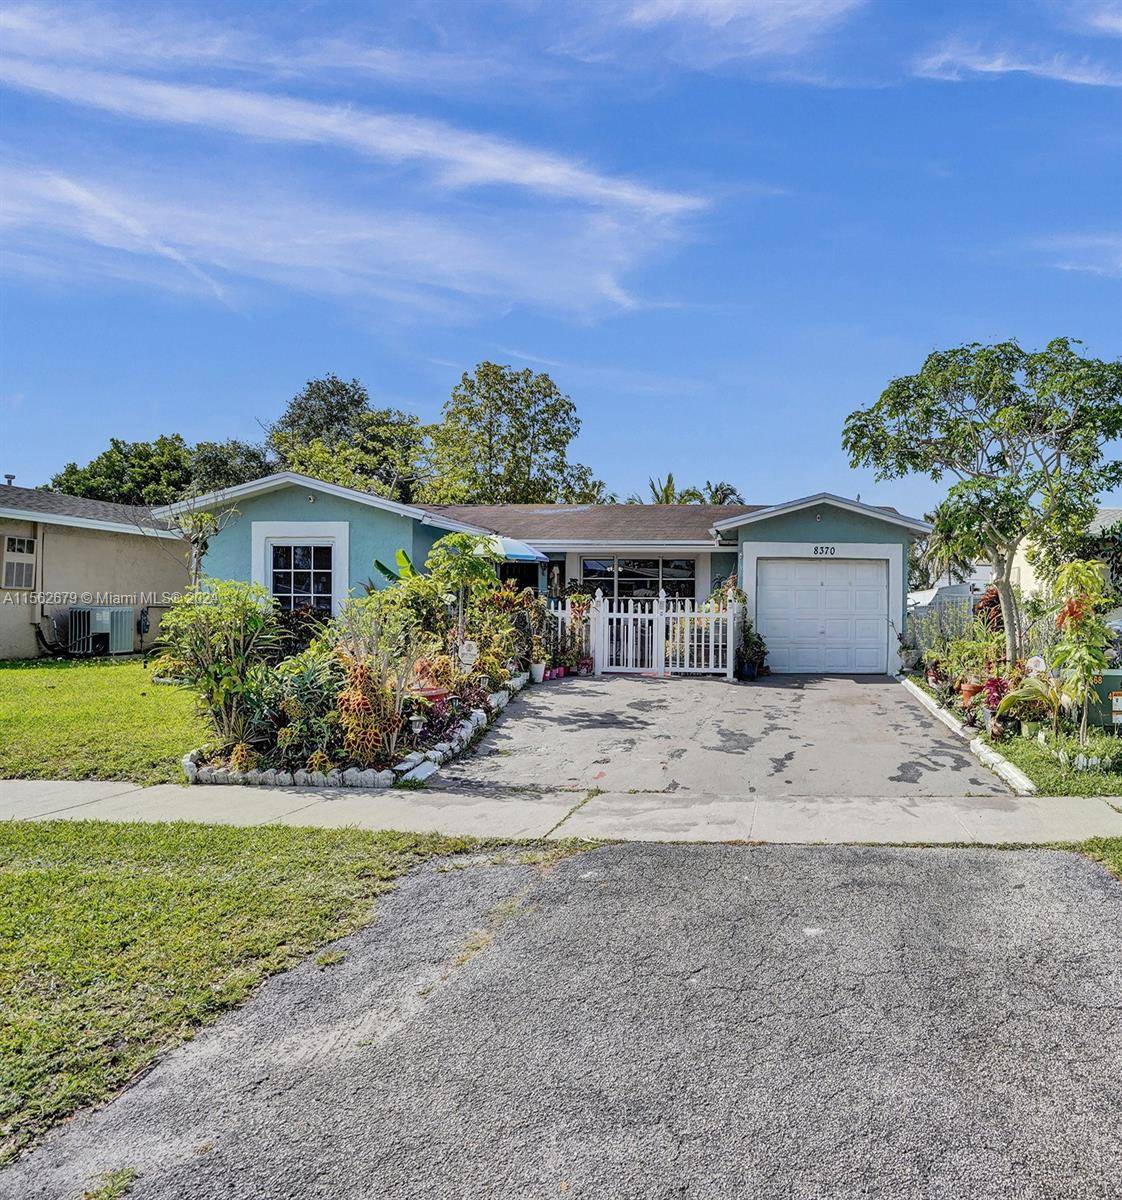 Welcome to this Lovely 3 bedroom, 2 bathroom home offering serene lake views just minutes away from the Sawgrass Mall.